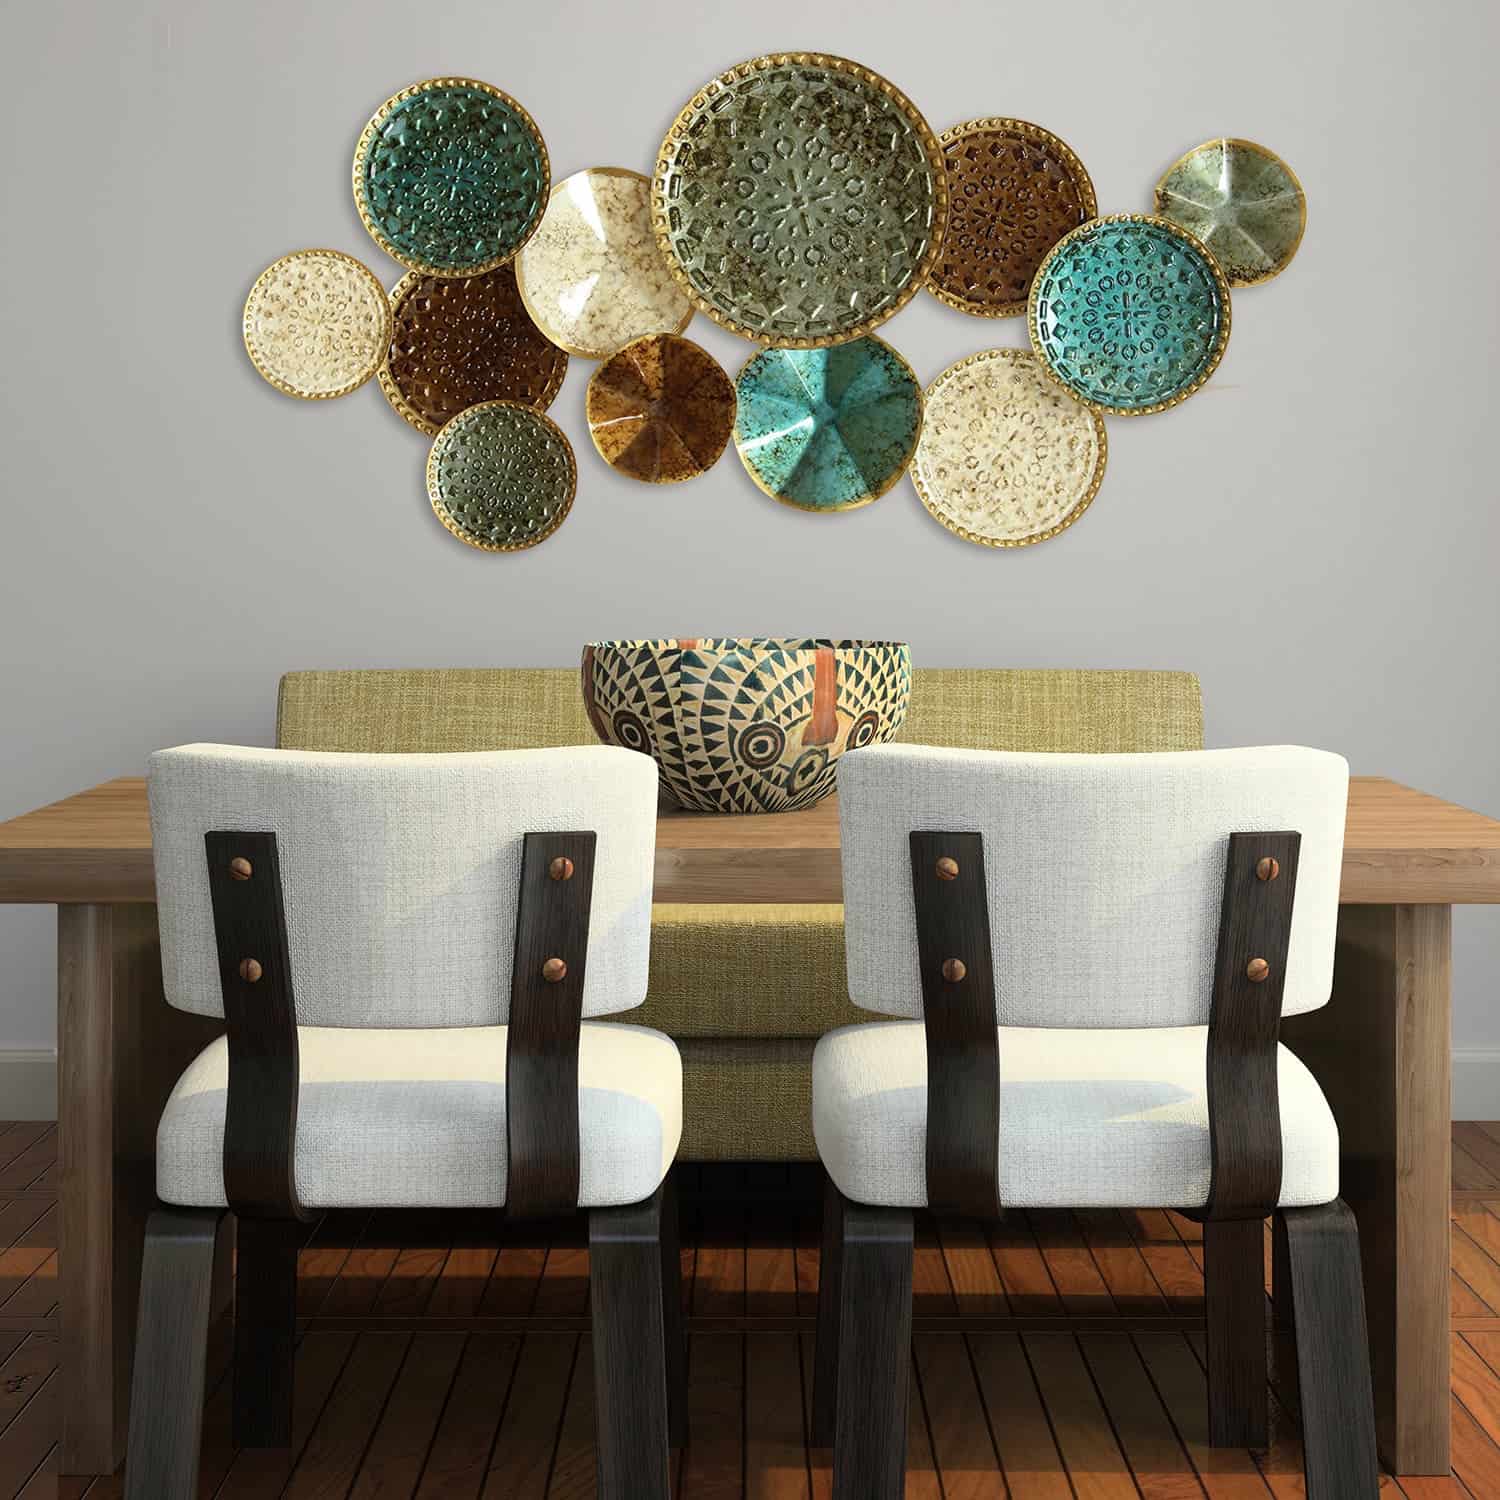 Eye-Catching Plates and Bowls Revitalize Walls